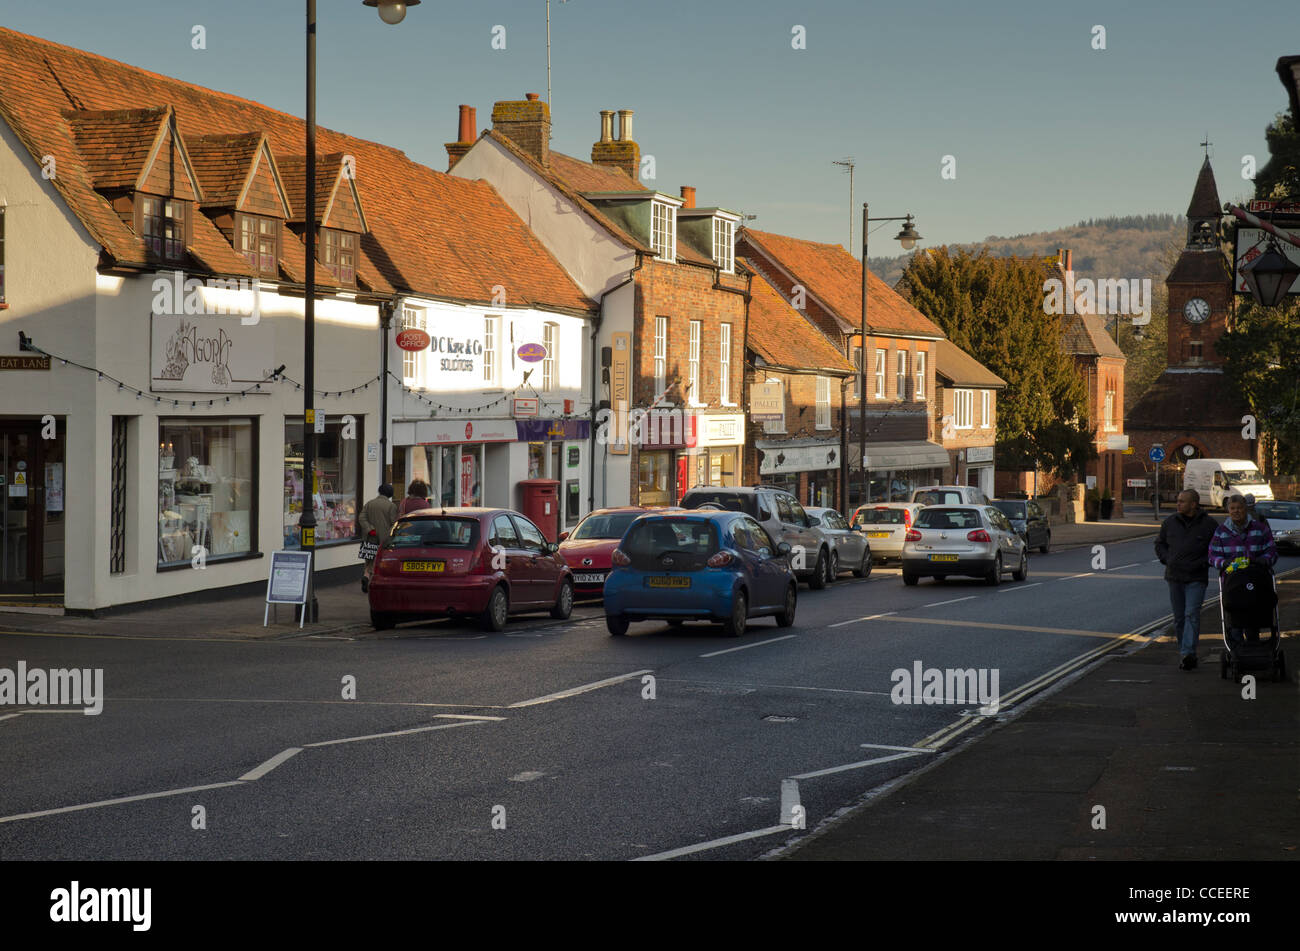 pedestrians passing cars, traffic, small shops and businesses in High Street Wendover Bucks UK Stock Photo